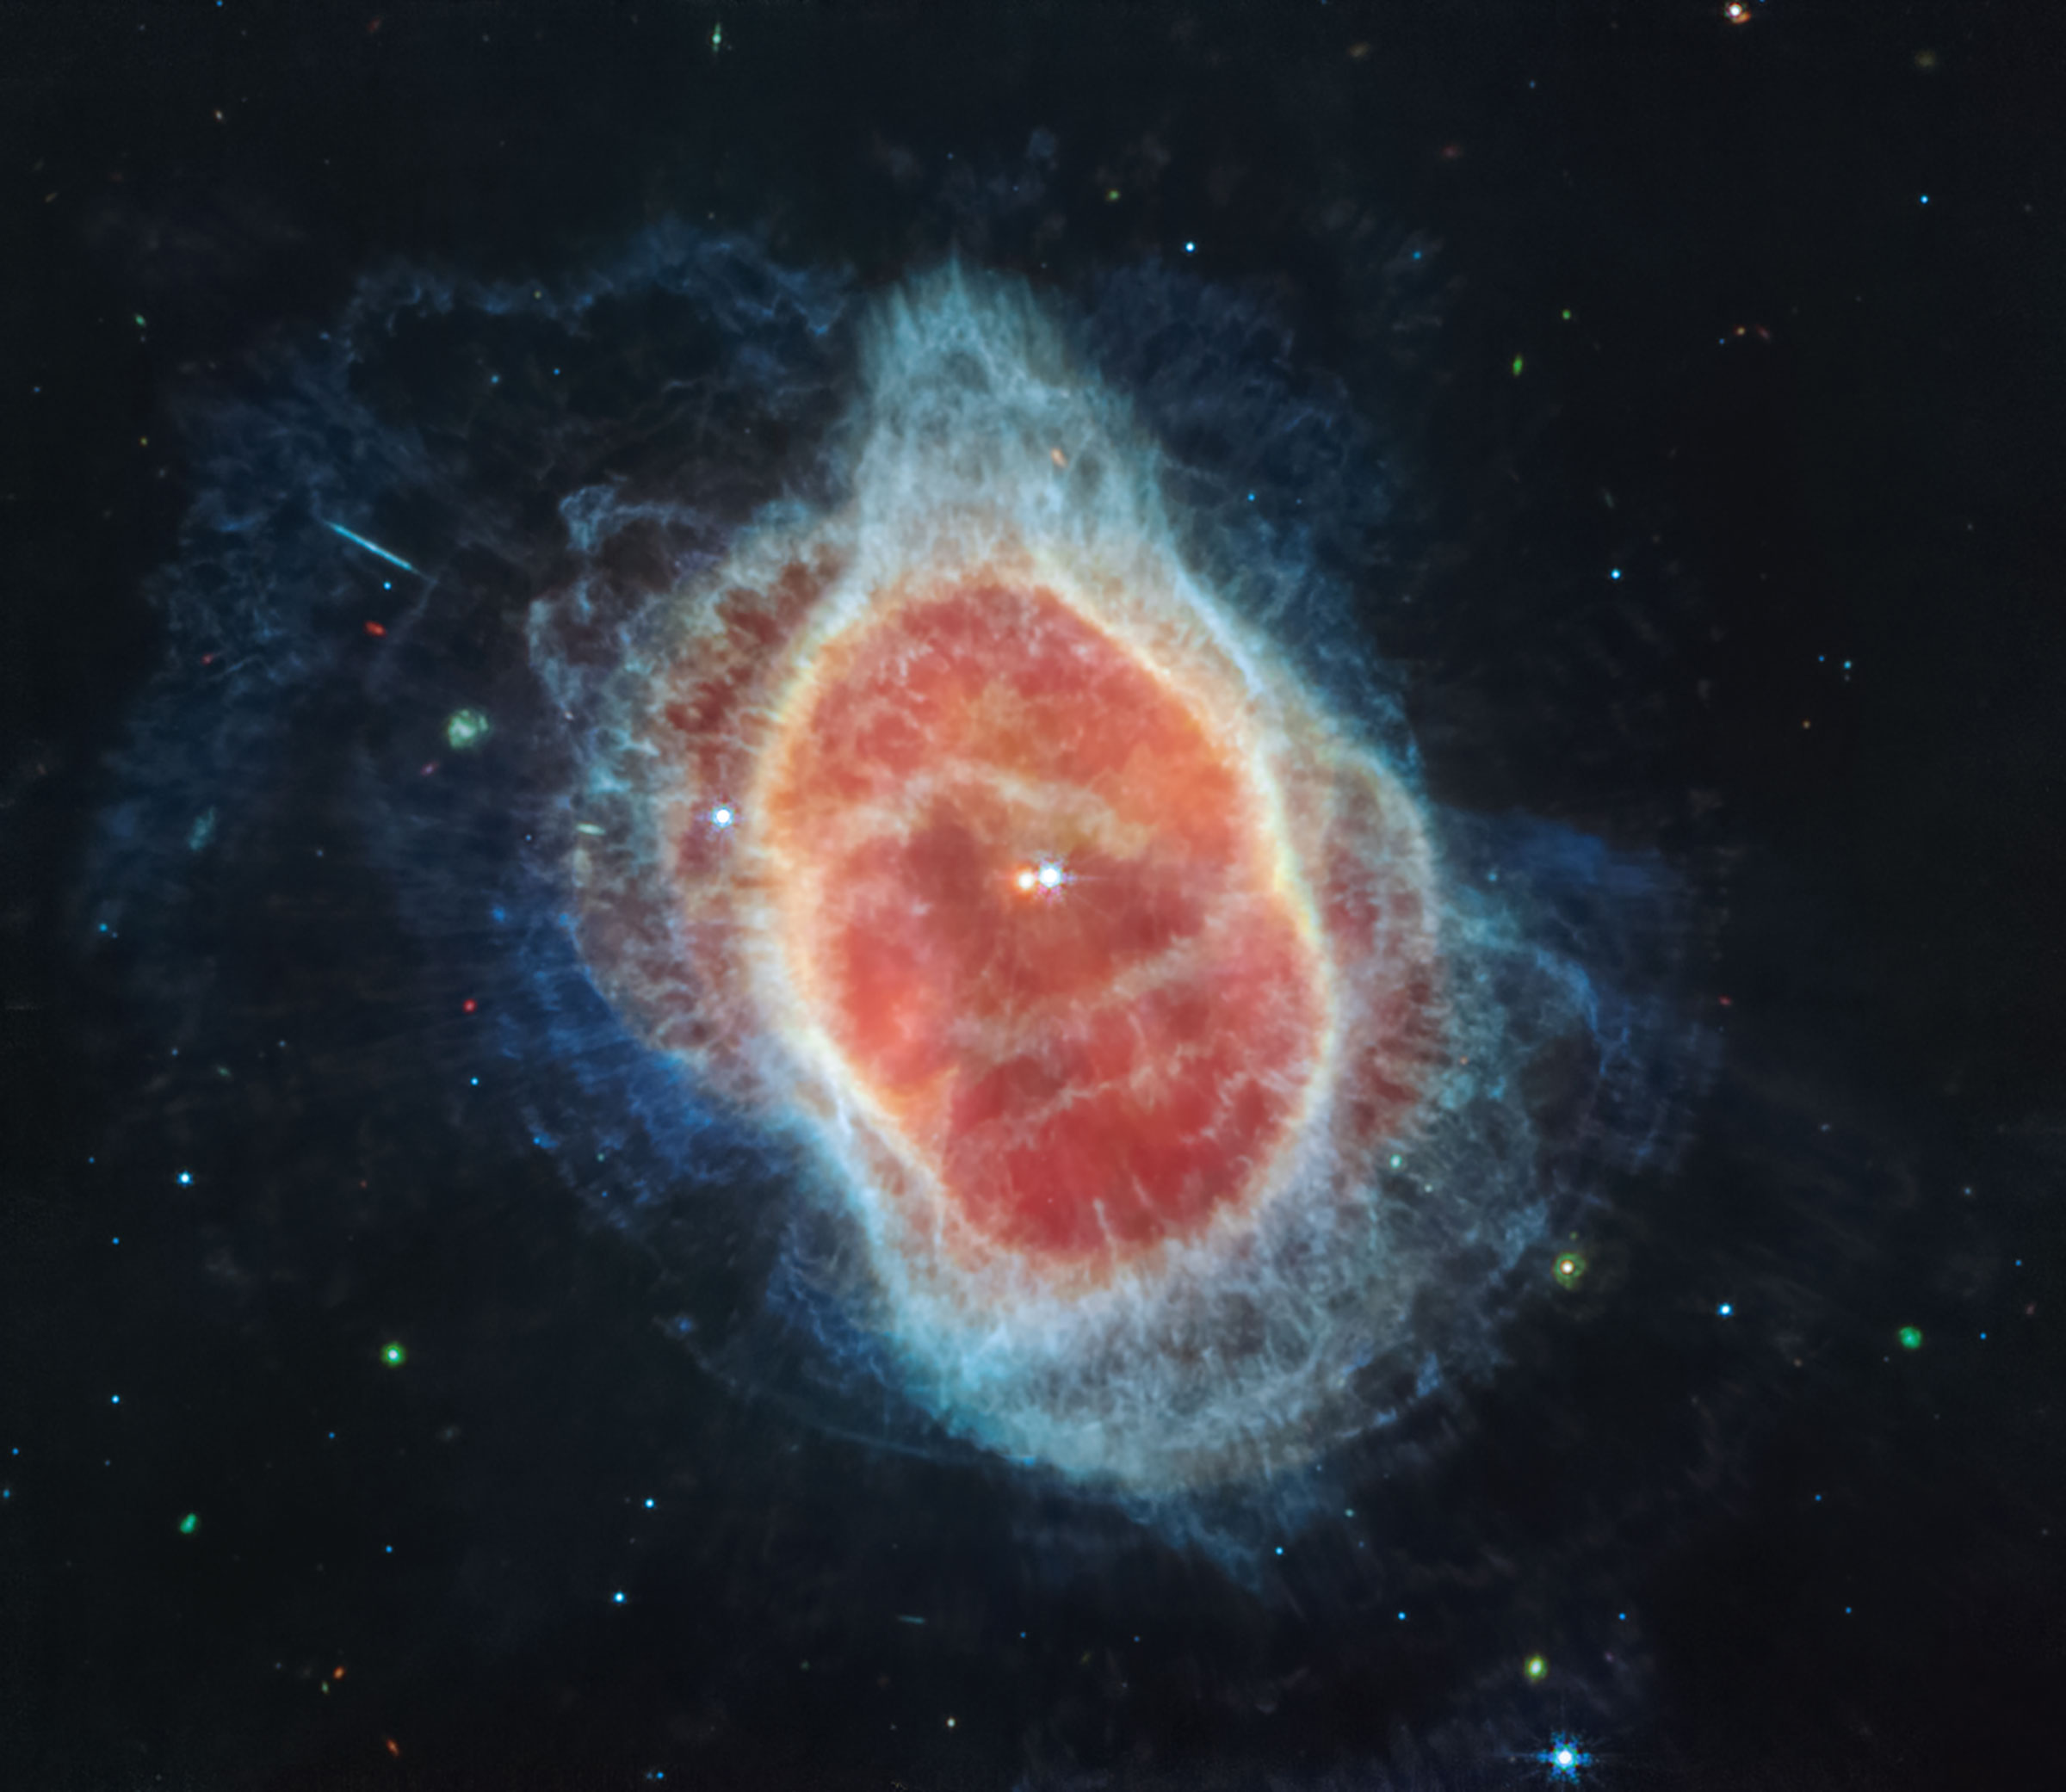 A planetary nebula seen, by Webb’s MIRI, against the blackness of space, with points of starlight behind it. Plumes of glowing bright blue gas radiate out from the oval-shaped nebula. Two separate ovals of reddish pink gas appear stacked on top of each other, inside the lacy blue gas clouds. In the center of the nebula, two stars glow close to each other. One star looks more red, while the other appears more yellow. (NASA, ESA, CSA, STScI)